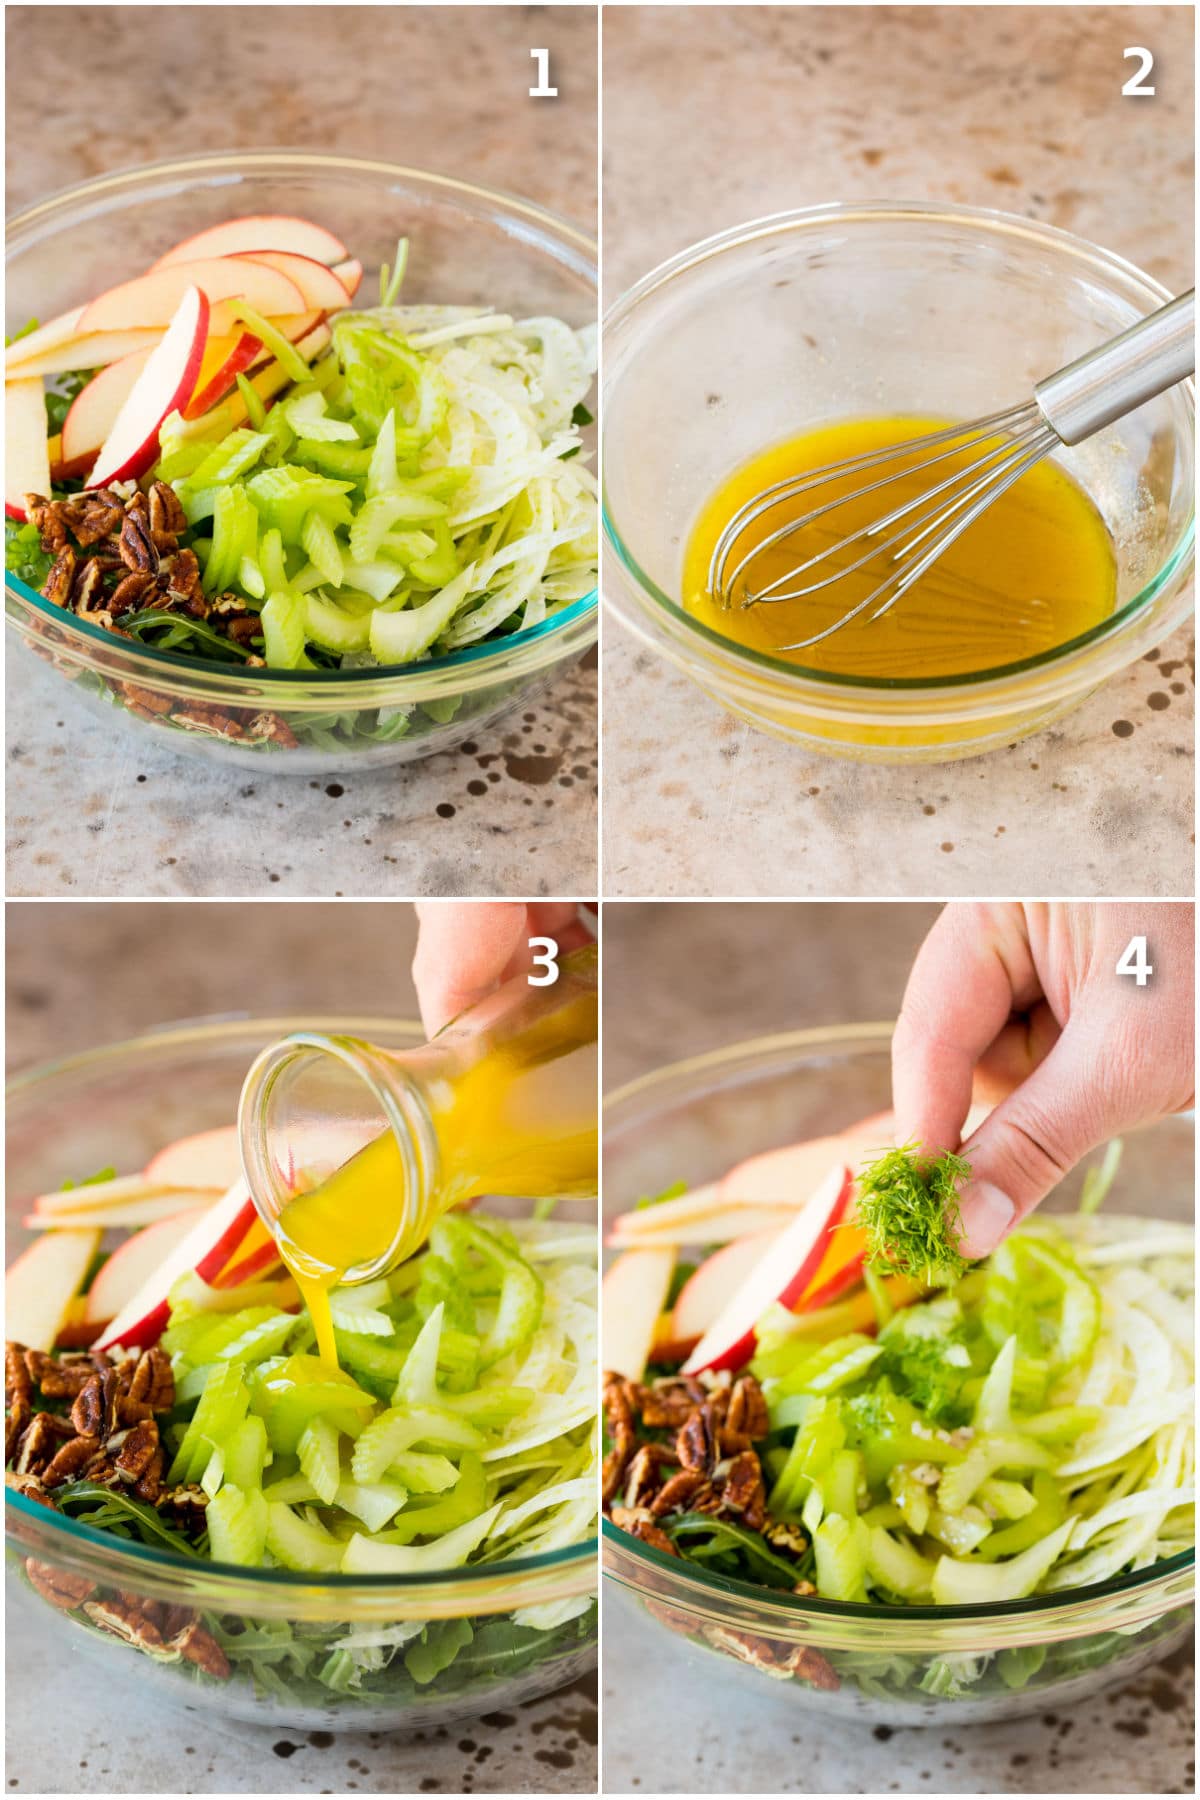 Step by step process shots showing how to make fennel salad.